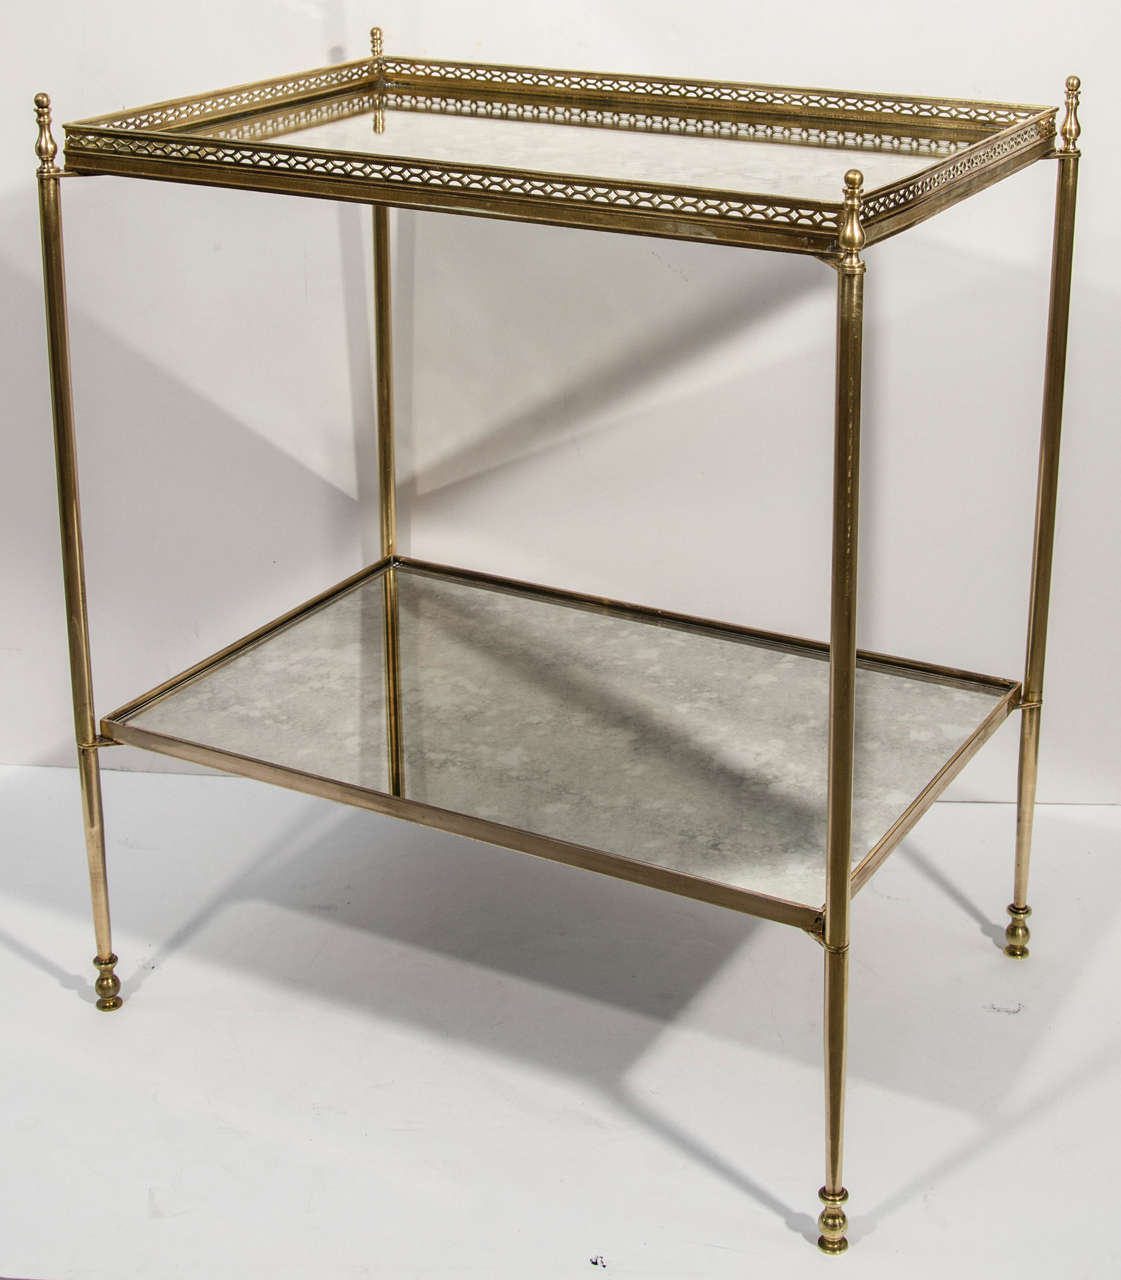 Classical two tier side table in brass with smokey antique mirrored tops. The table features a brass gallery along the top tier with pierced filigree designs, and has elegant cylinder legs with stylized urn form feet.